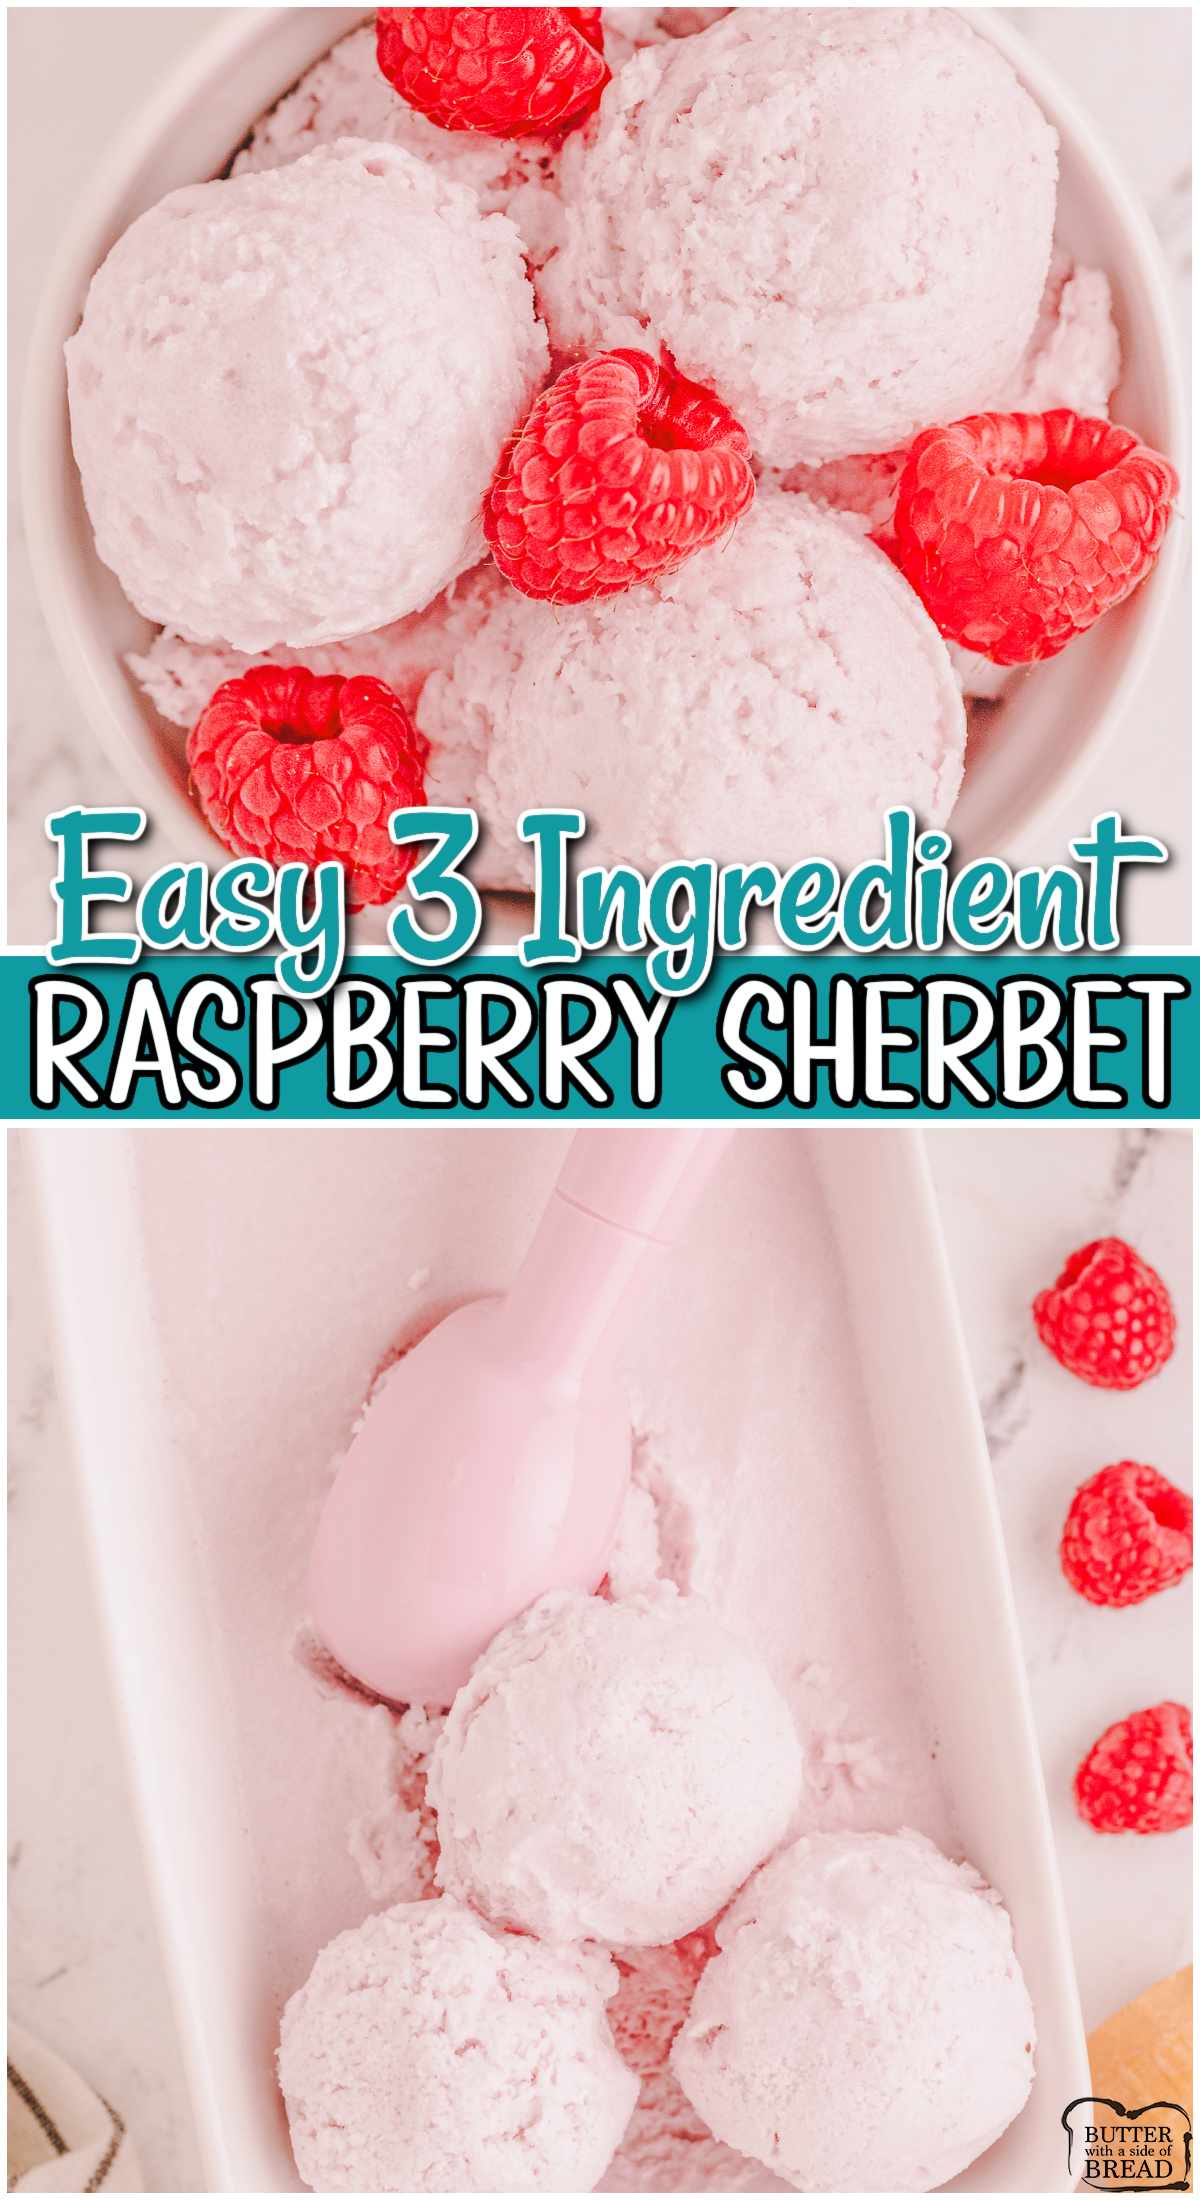 Fun & tasty Raspberry Sherbet recipe made with just 3 ingredients! Fantastic raspberry flavor in this creamy sherbet made with whipped topping, sweetened condensed milk & sparkling water!